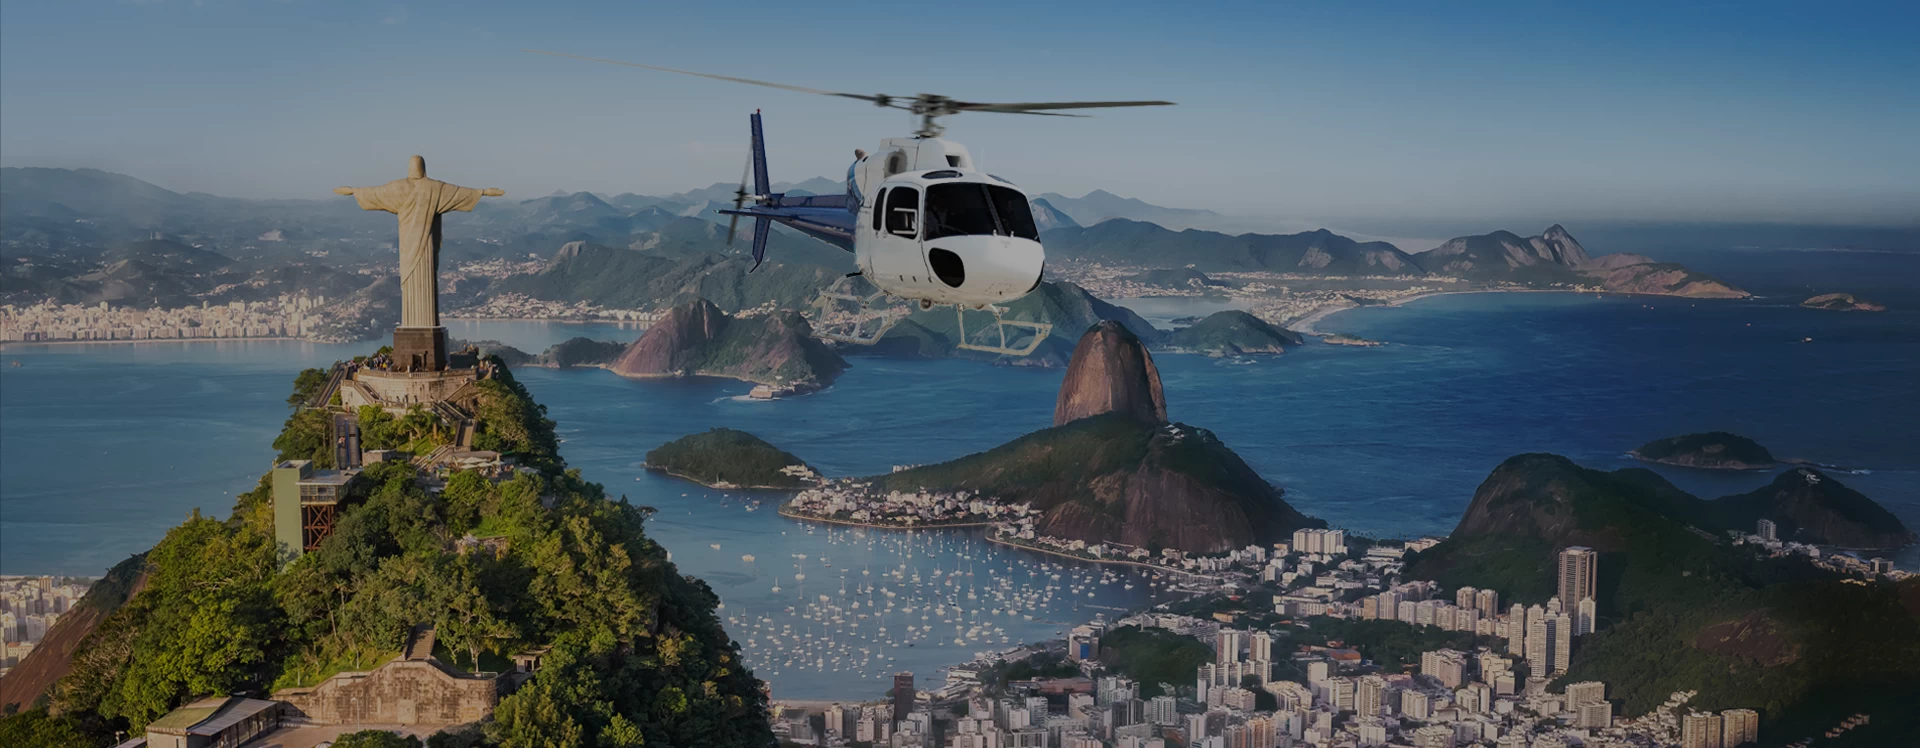 Aerial image of Rio de Janeiro highlighted in the background of the home page